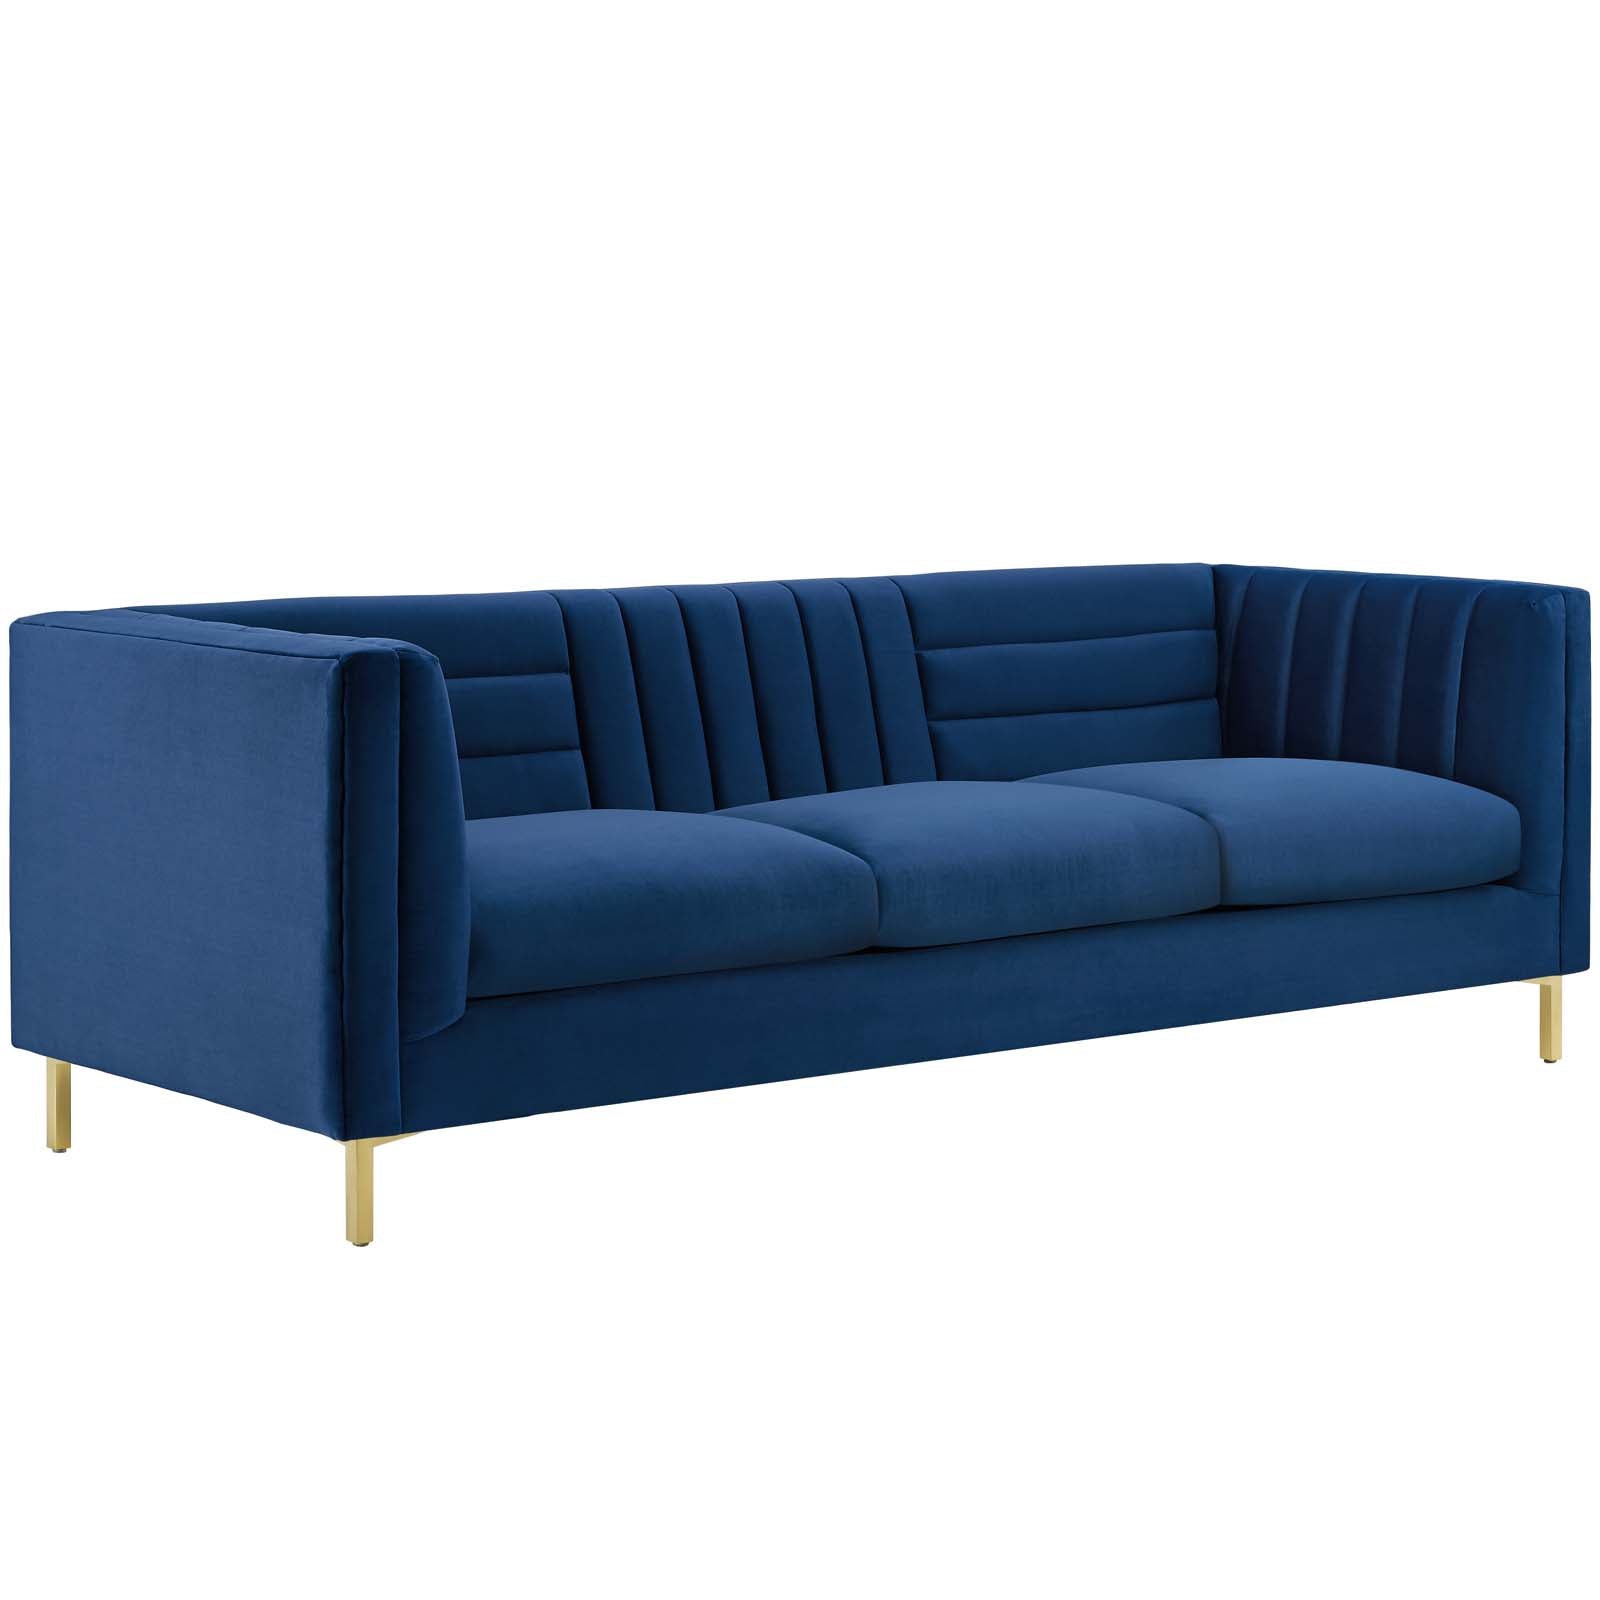 Modway Sofas & Couches - Ingenuity Channel Tufted Performance Velvet Sofa Navy